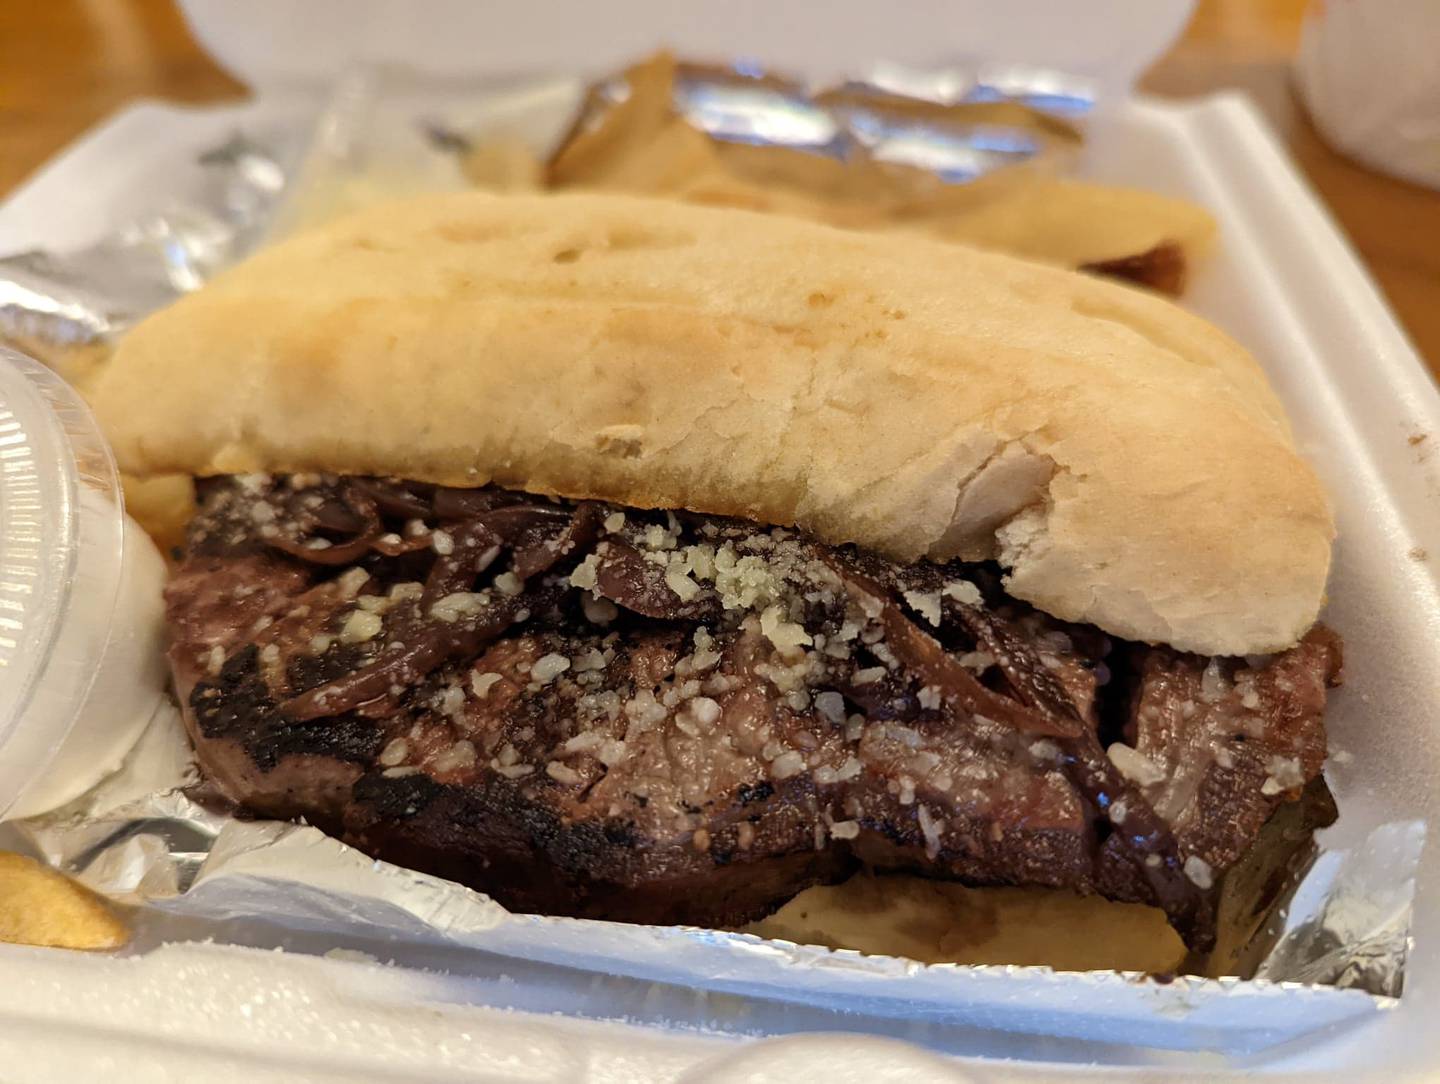 The steak sandwich at Al's Steak House in Joliet comes with carmelized onions, parmesan cheese, horseradish sauce and garlic butter.